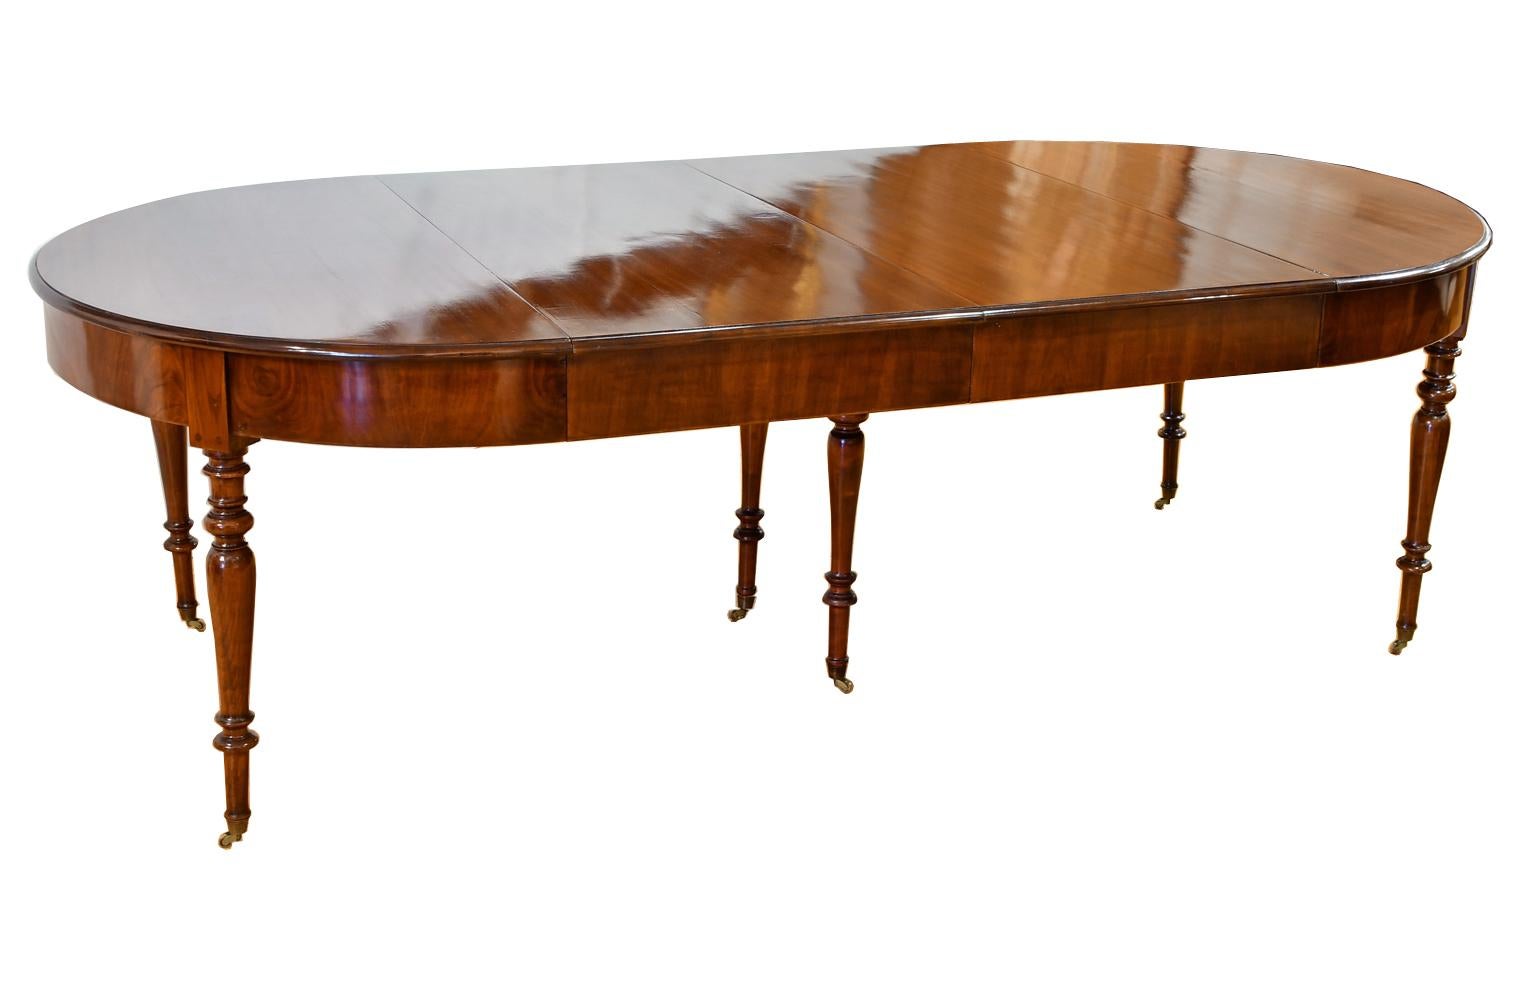 Antique 12 Foot Extension Dining Table in Mahogany w Racetrack Top & Four Leaves 8